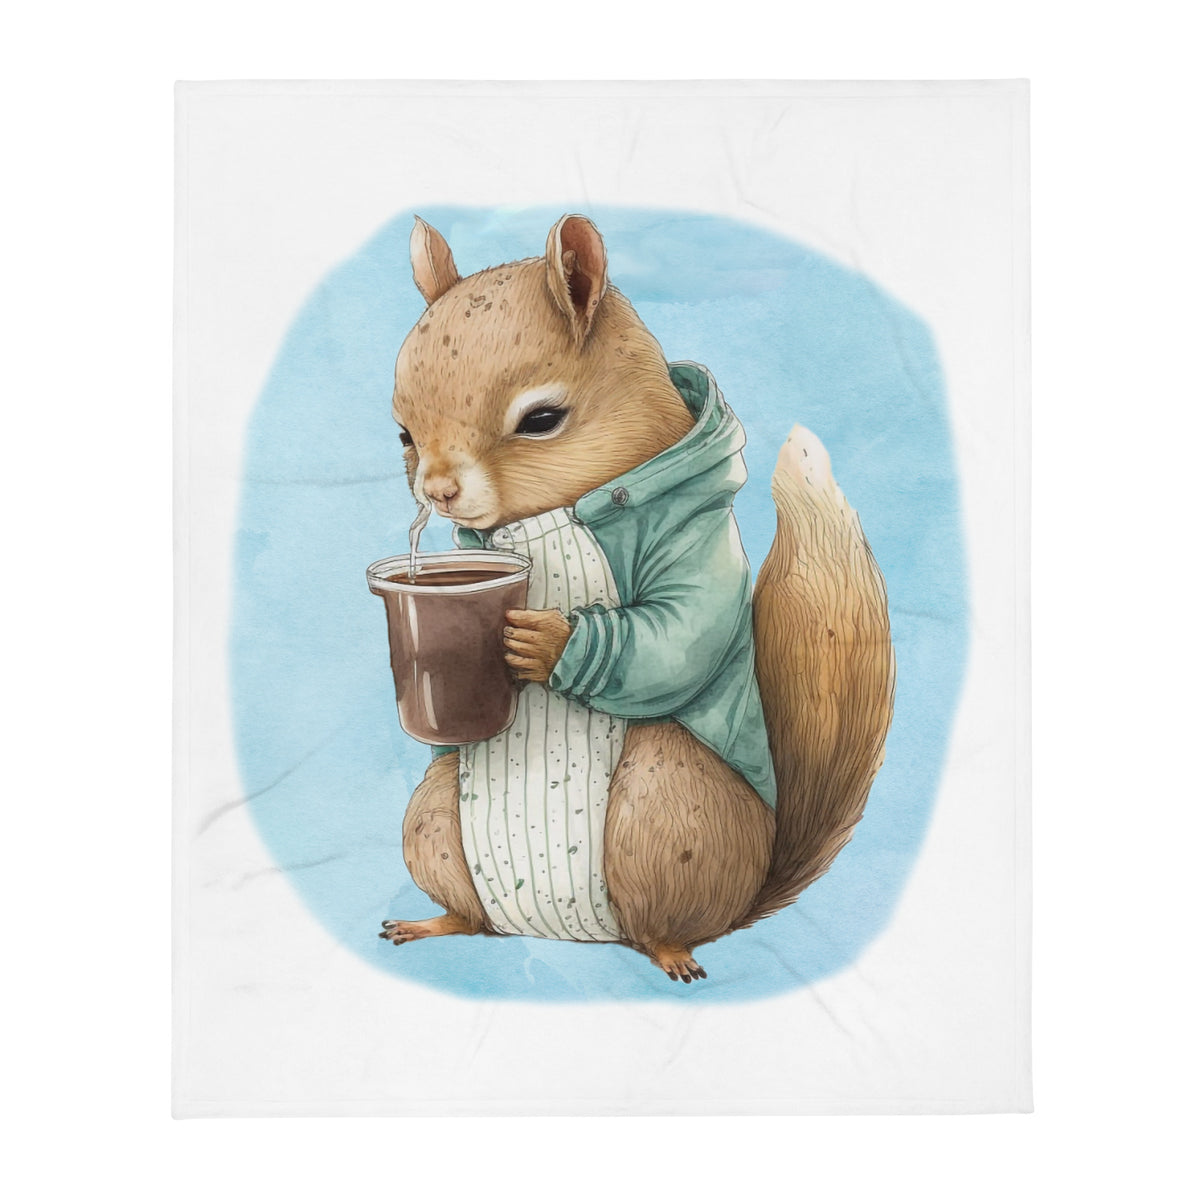 Sleepy Squirrel 100% Polyester Soft Silk Touch Fabric Throw Blanket - Cozy, Durable and Adorable